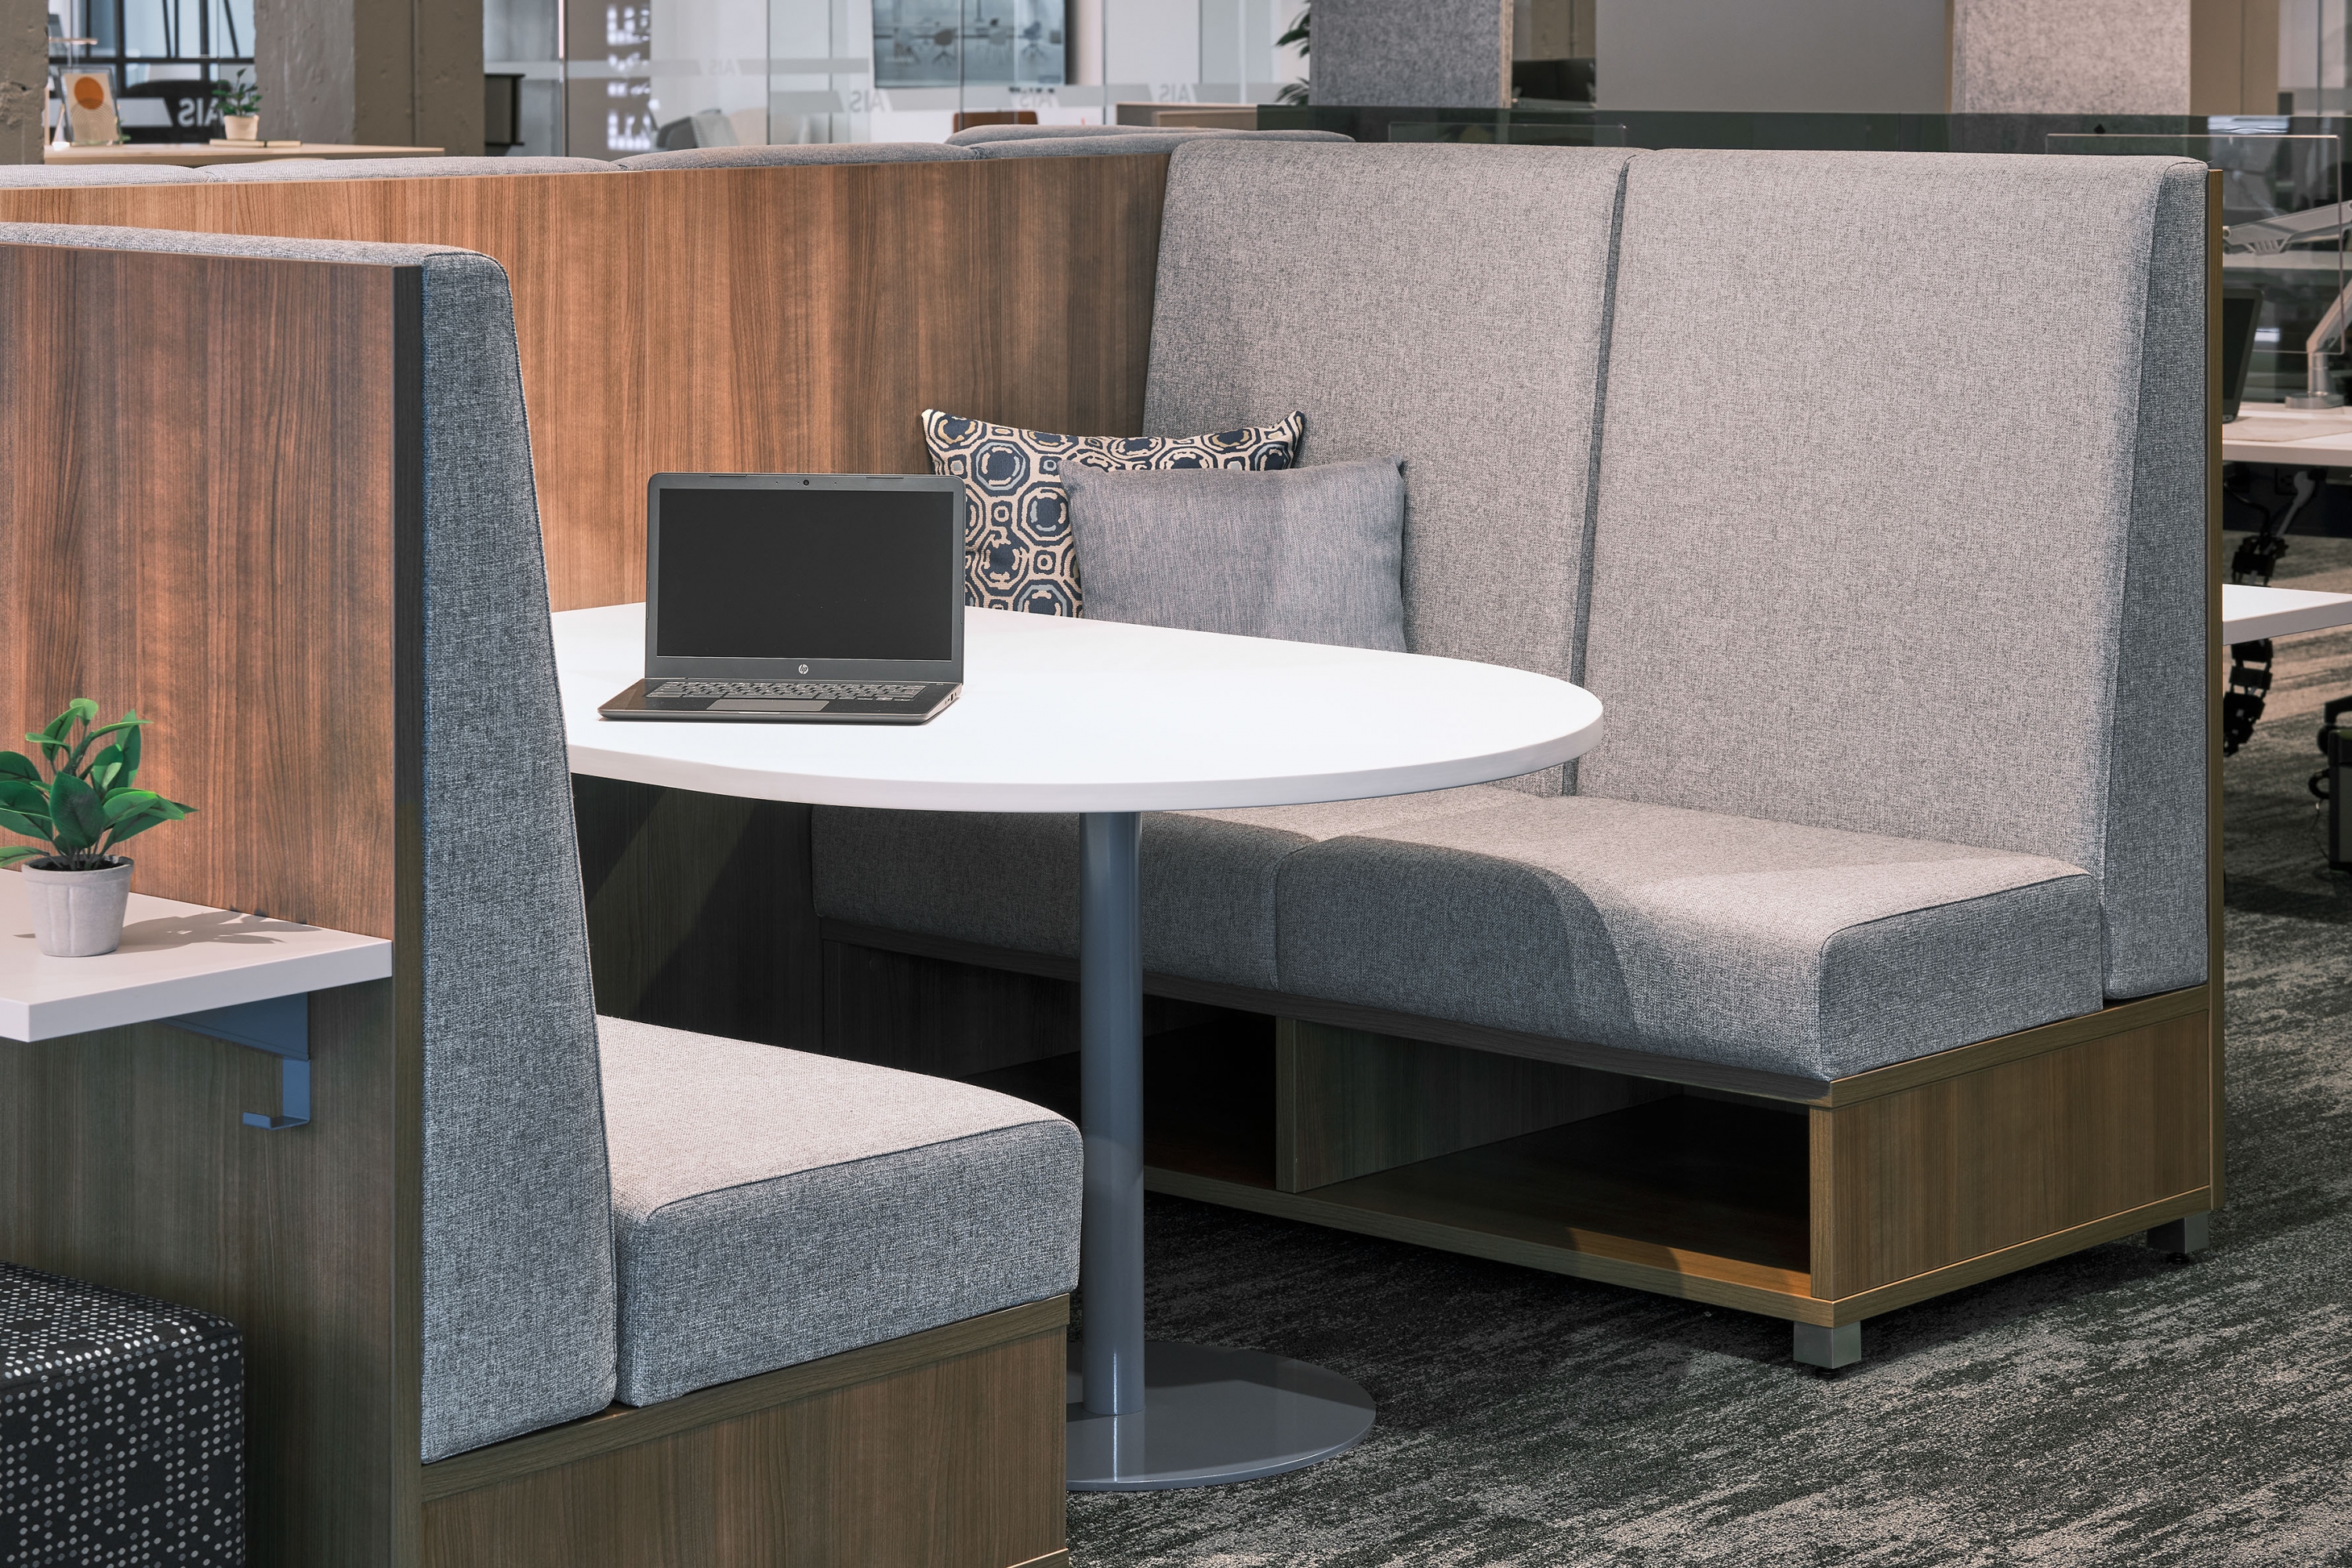 Panel-Systems-Unlimited-day-to-day-collaborative-table-with-lb-lounge_lg